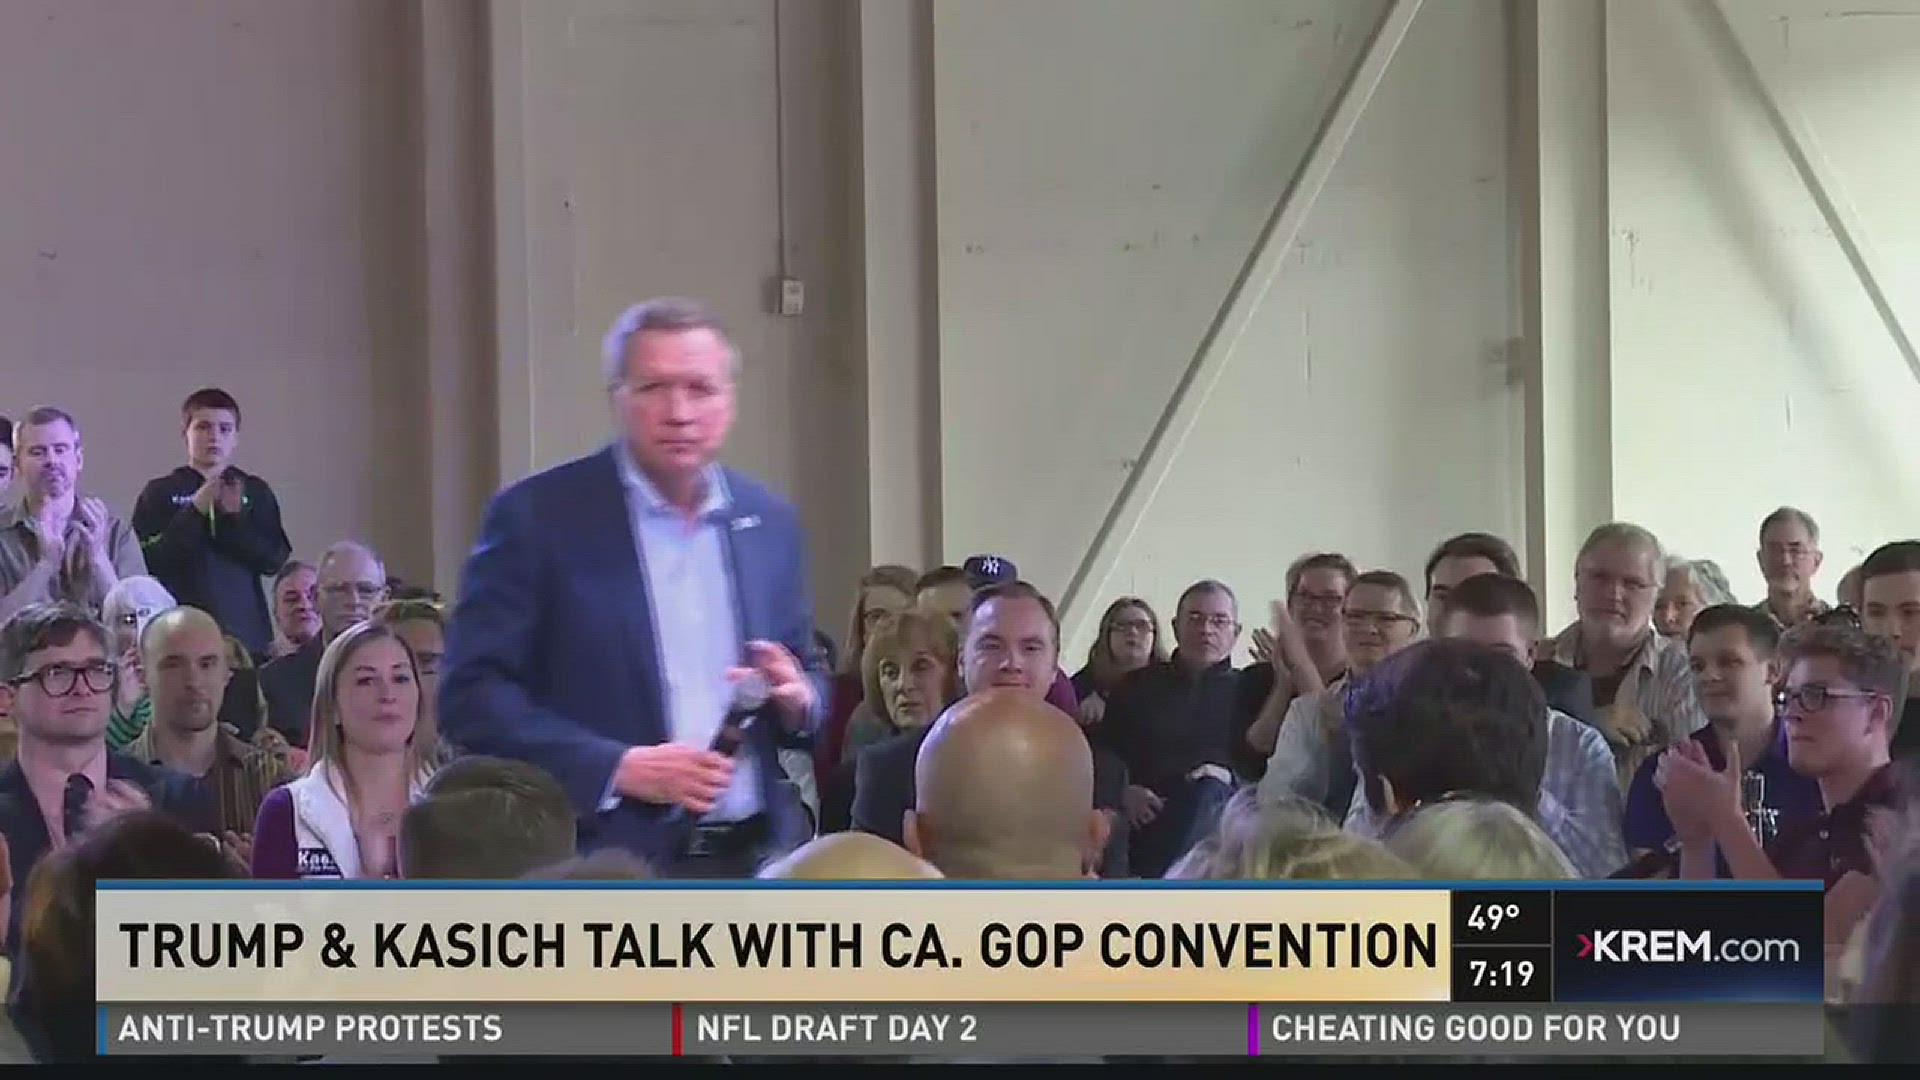 Donald Trump and John Kasich will address California's GOP Convention today while Ted Cruz speaks tomorrow.